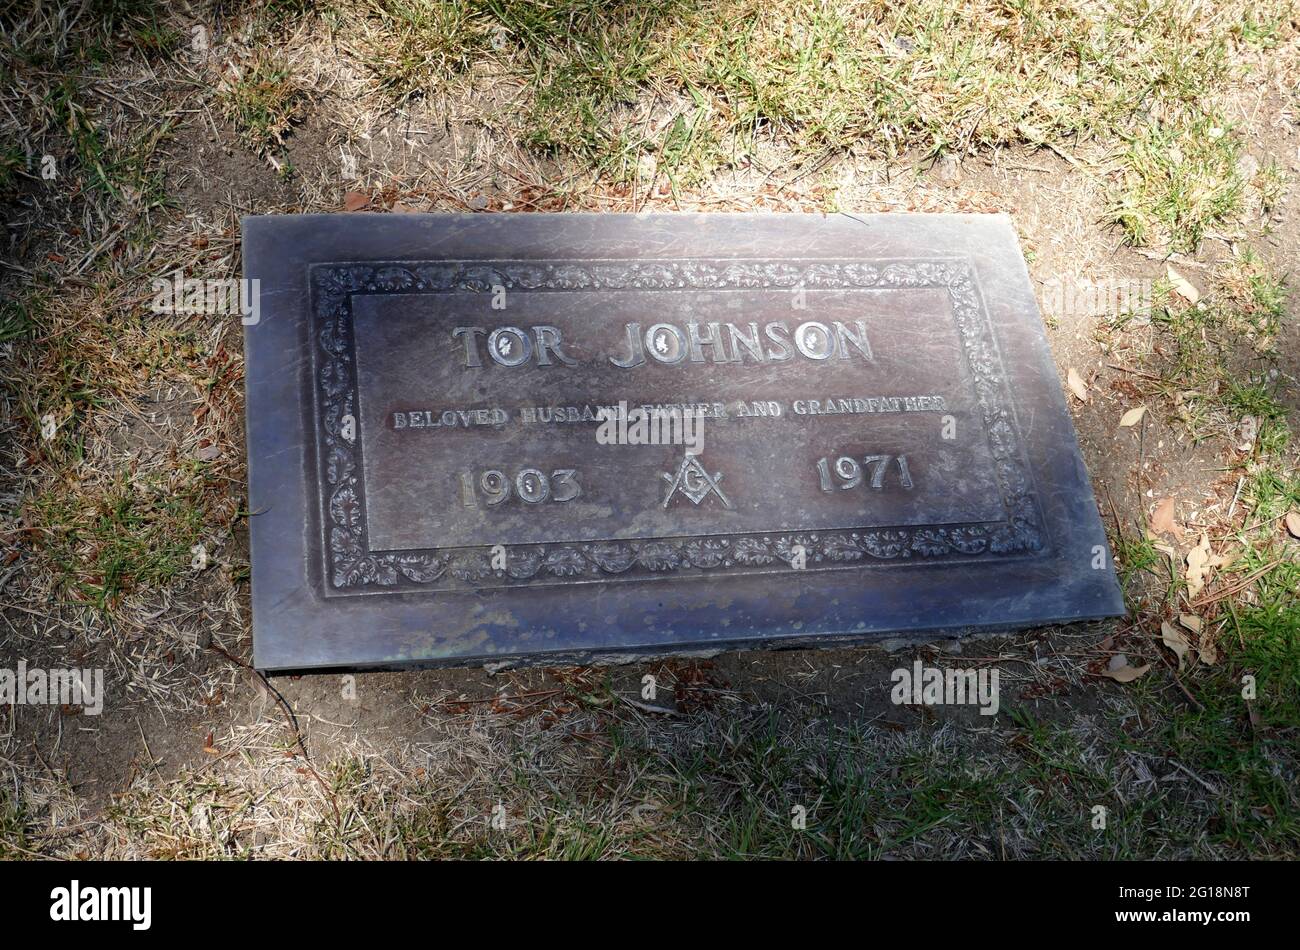 Newhall, California, USA 4th June 2021 A general view of atmosphere of actor Tor Johnson's Grave in Whispering Pines at Eternal Valley Memorial Park on June 4, 2021 at 23287 Sierra Hwy in Newhall, California, USA. Photo by Barry King/Alamy Stock Photo Stock Photo